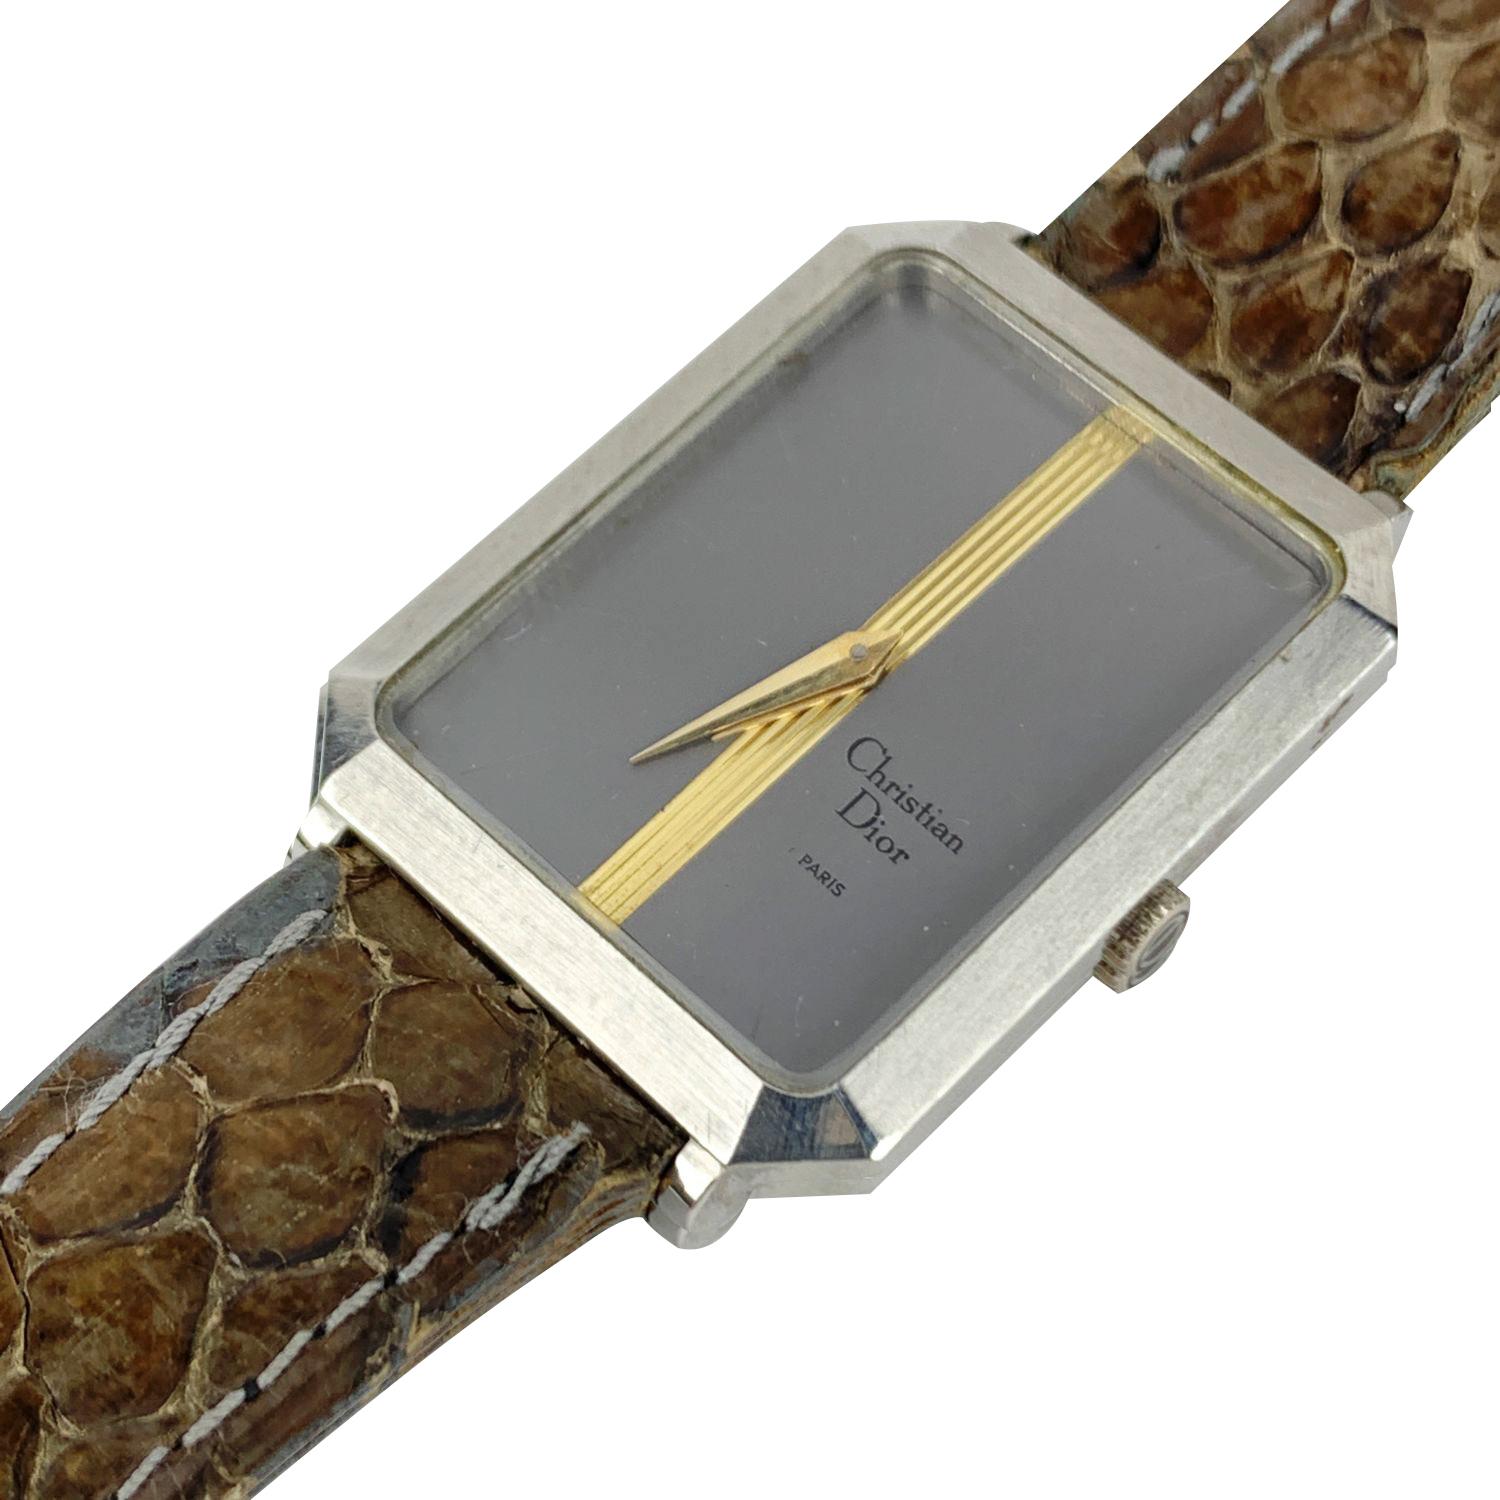 Vintage Christian Dior stainless steel wrist watch. Model 7836 - 131004. Stainless steel case. Automatic movement. Gray dial with gold stripe. Brown leather strap. CD buckle. Measurements: Adjustable shoulder strap. Max circumference: 8 inches -